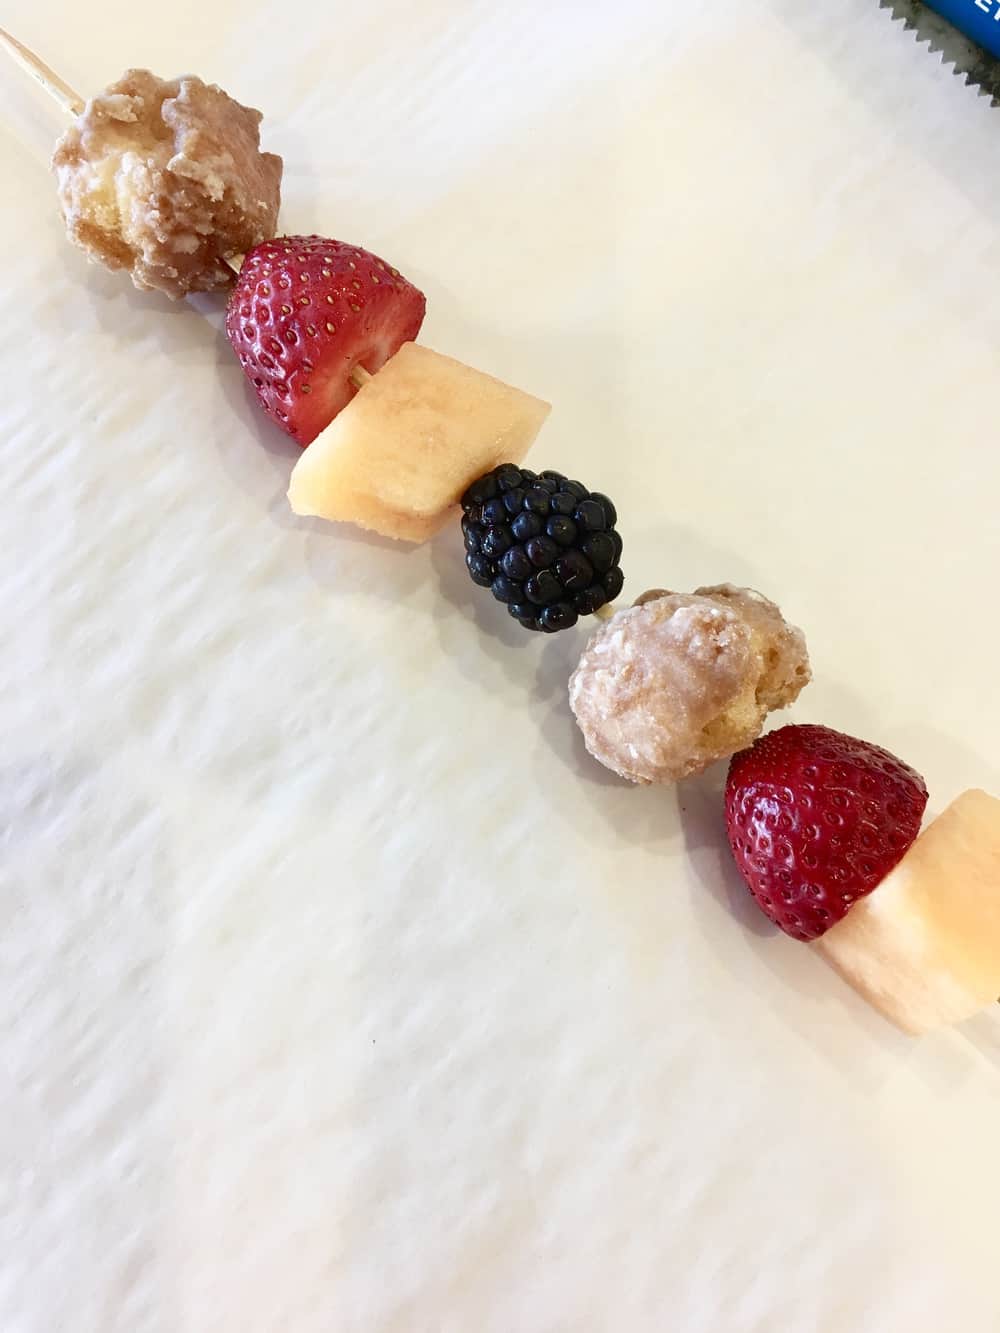 Donut and Fruit Skewers Kabobs are an easy recipe to serve at Baby Showers or Bridal Showers. Great as an after school snack too or kids birthday parties. #donut #fruit #skewer #babyshowerfood #bridalshowerfood #easyrecipe #dessert #appetizer #simpledish #footballfood #afterschoolsnack